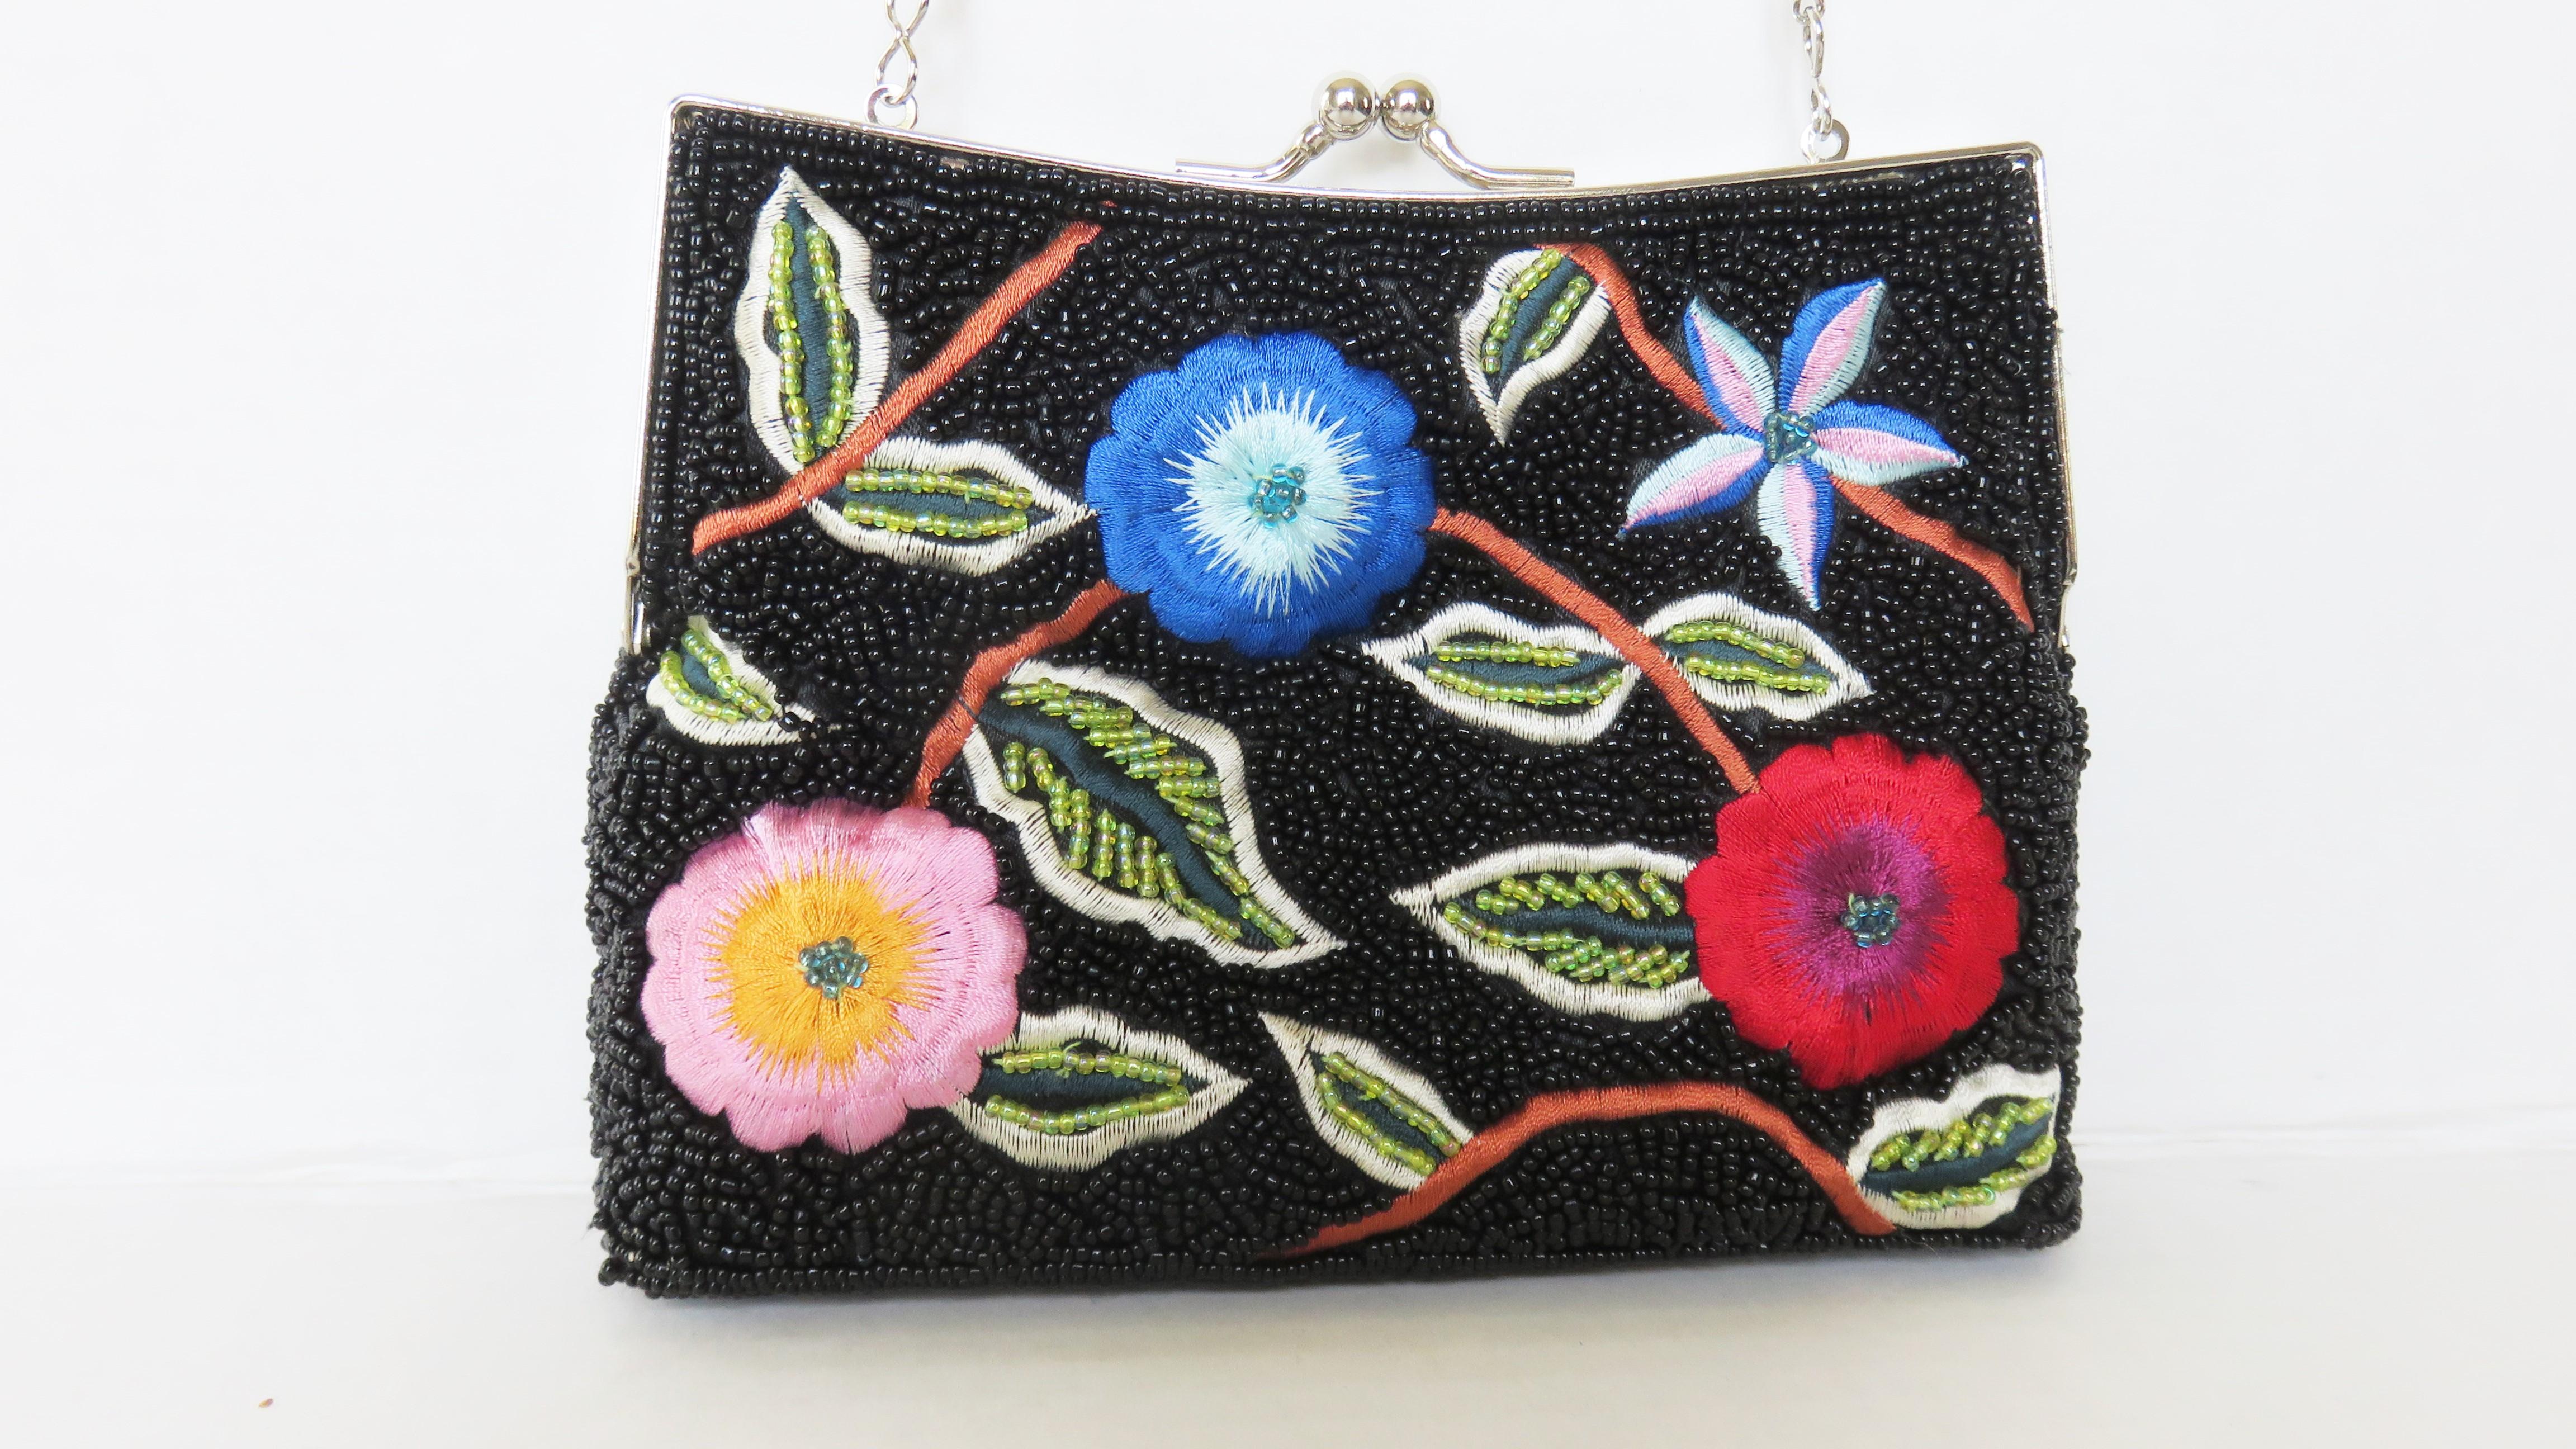 Beaded and Embroidery Clutch with Optional Chain Shoulder Strap 1980s For Sale 4